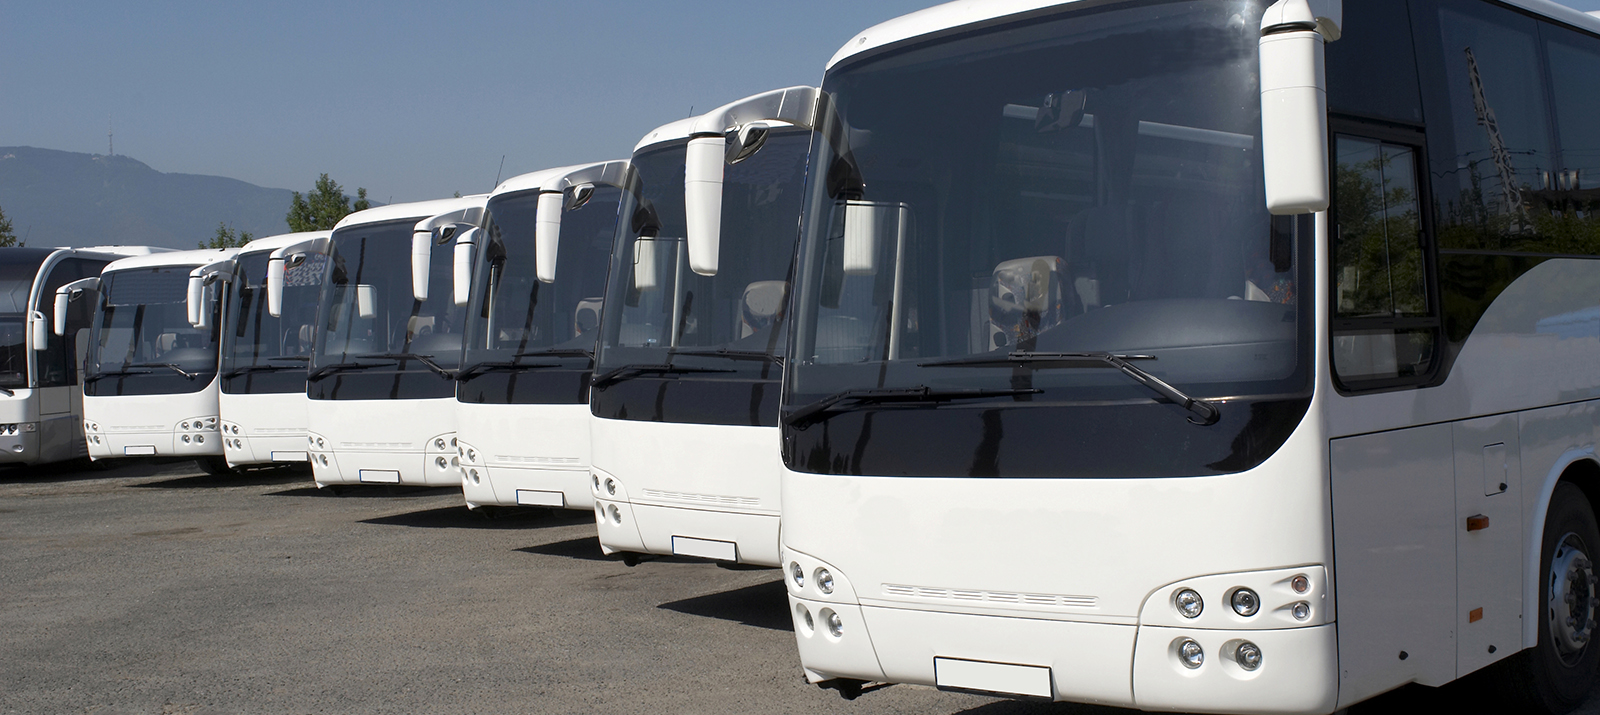 Read more about the article Coach Hire Sydney Rates Are Very Cheap